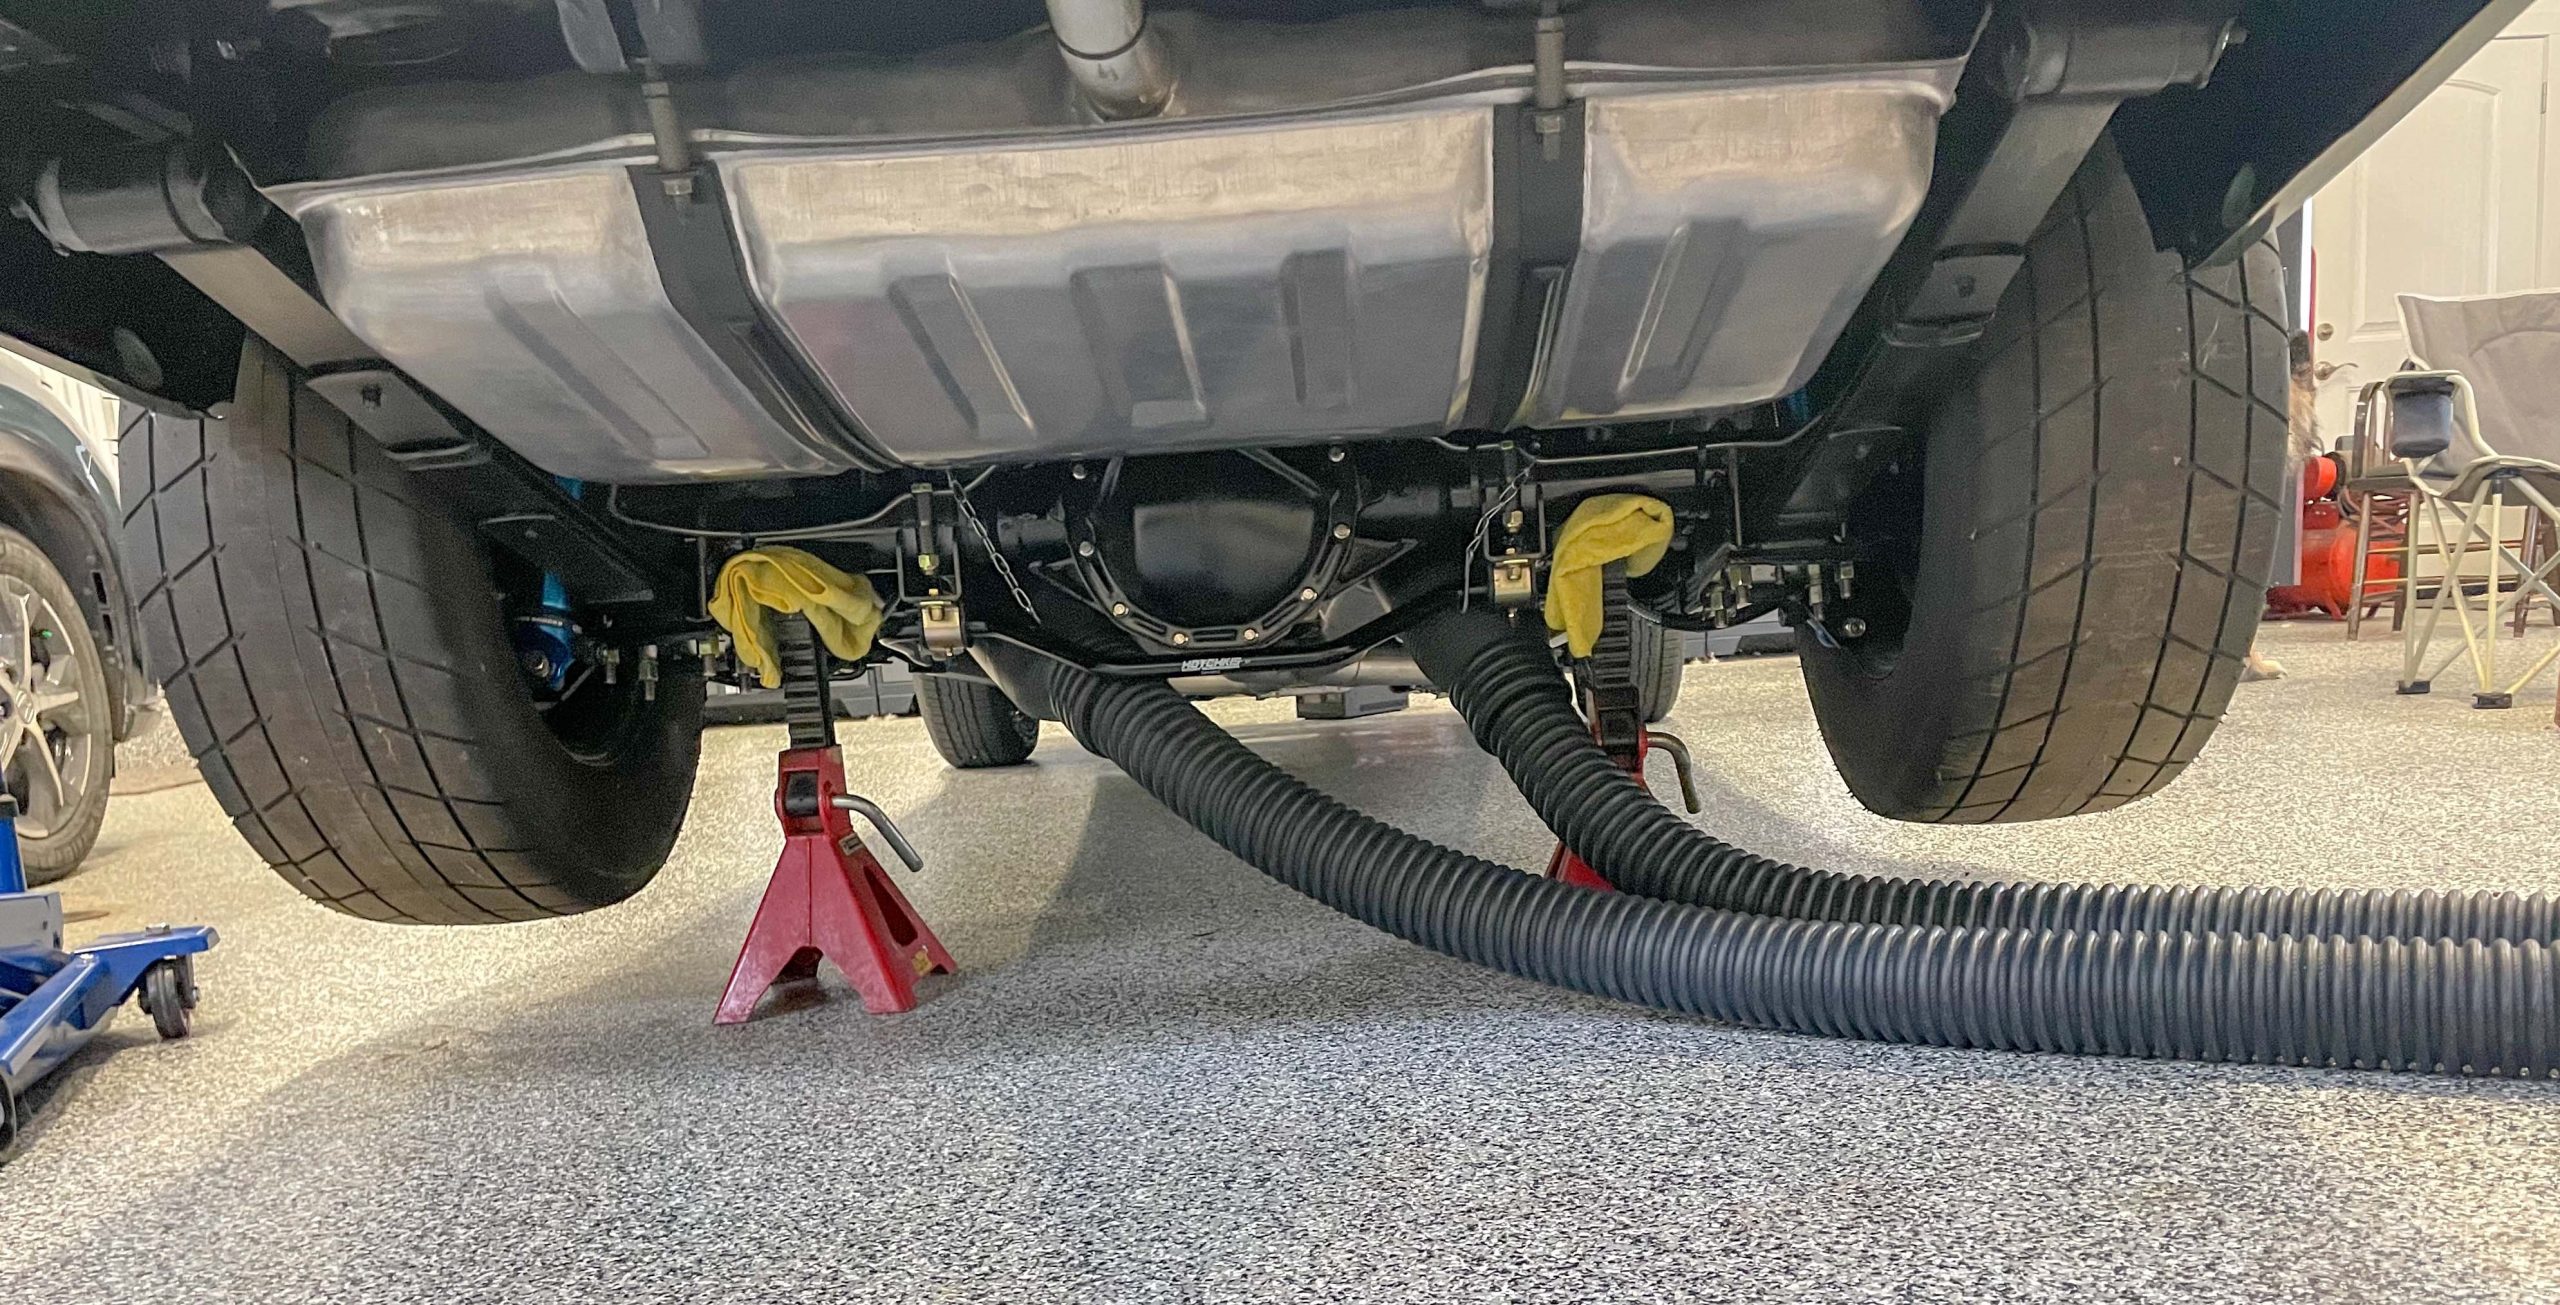 https://www.onallcylinders.com/wp-content/uploads/2023/02/08/garage-exhuast-system-installed-on-tailpipes-of-an-old-muscle-car-scaled.jpg